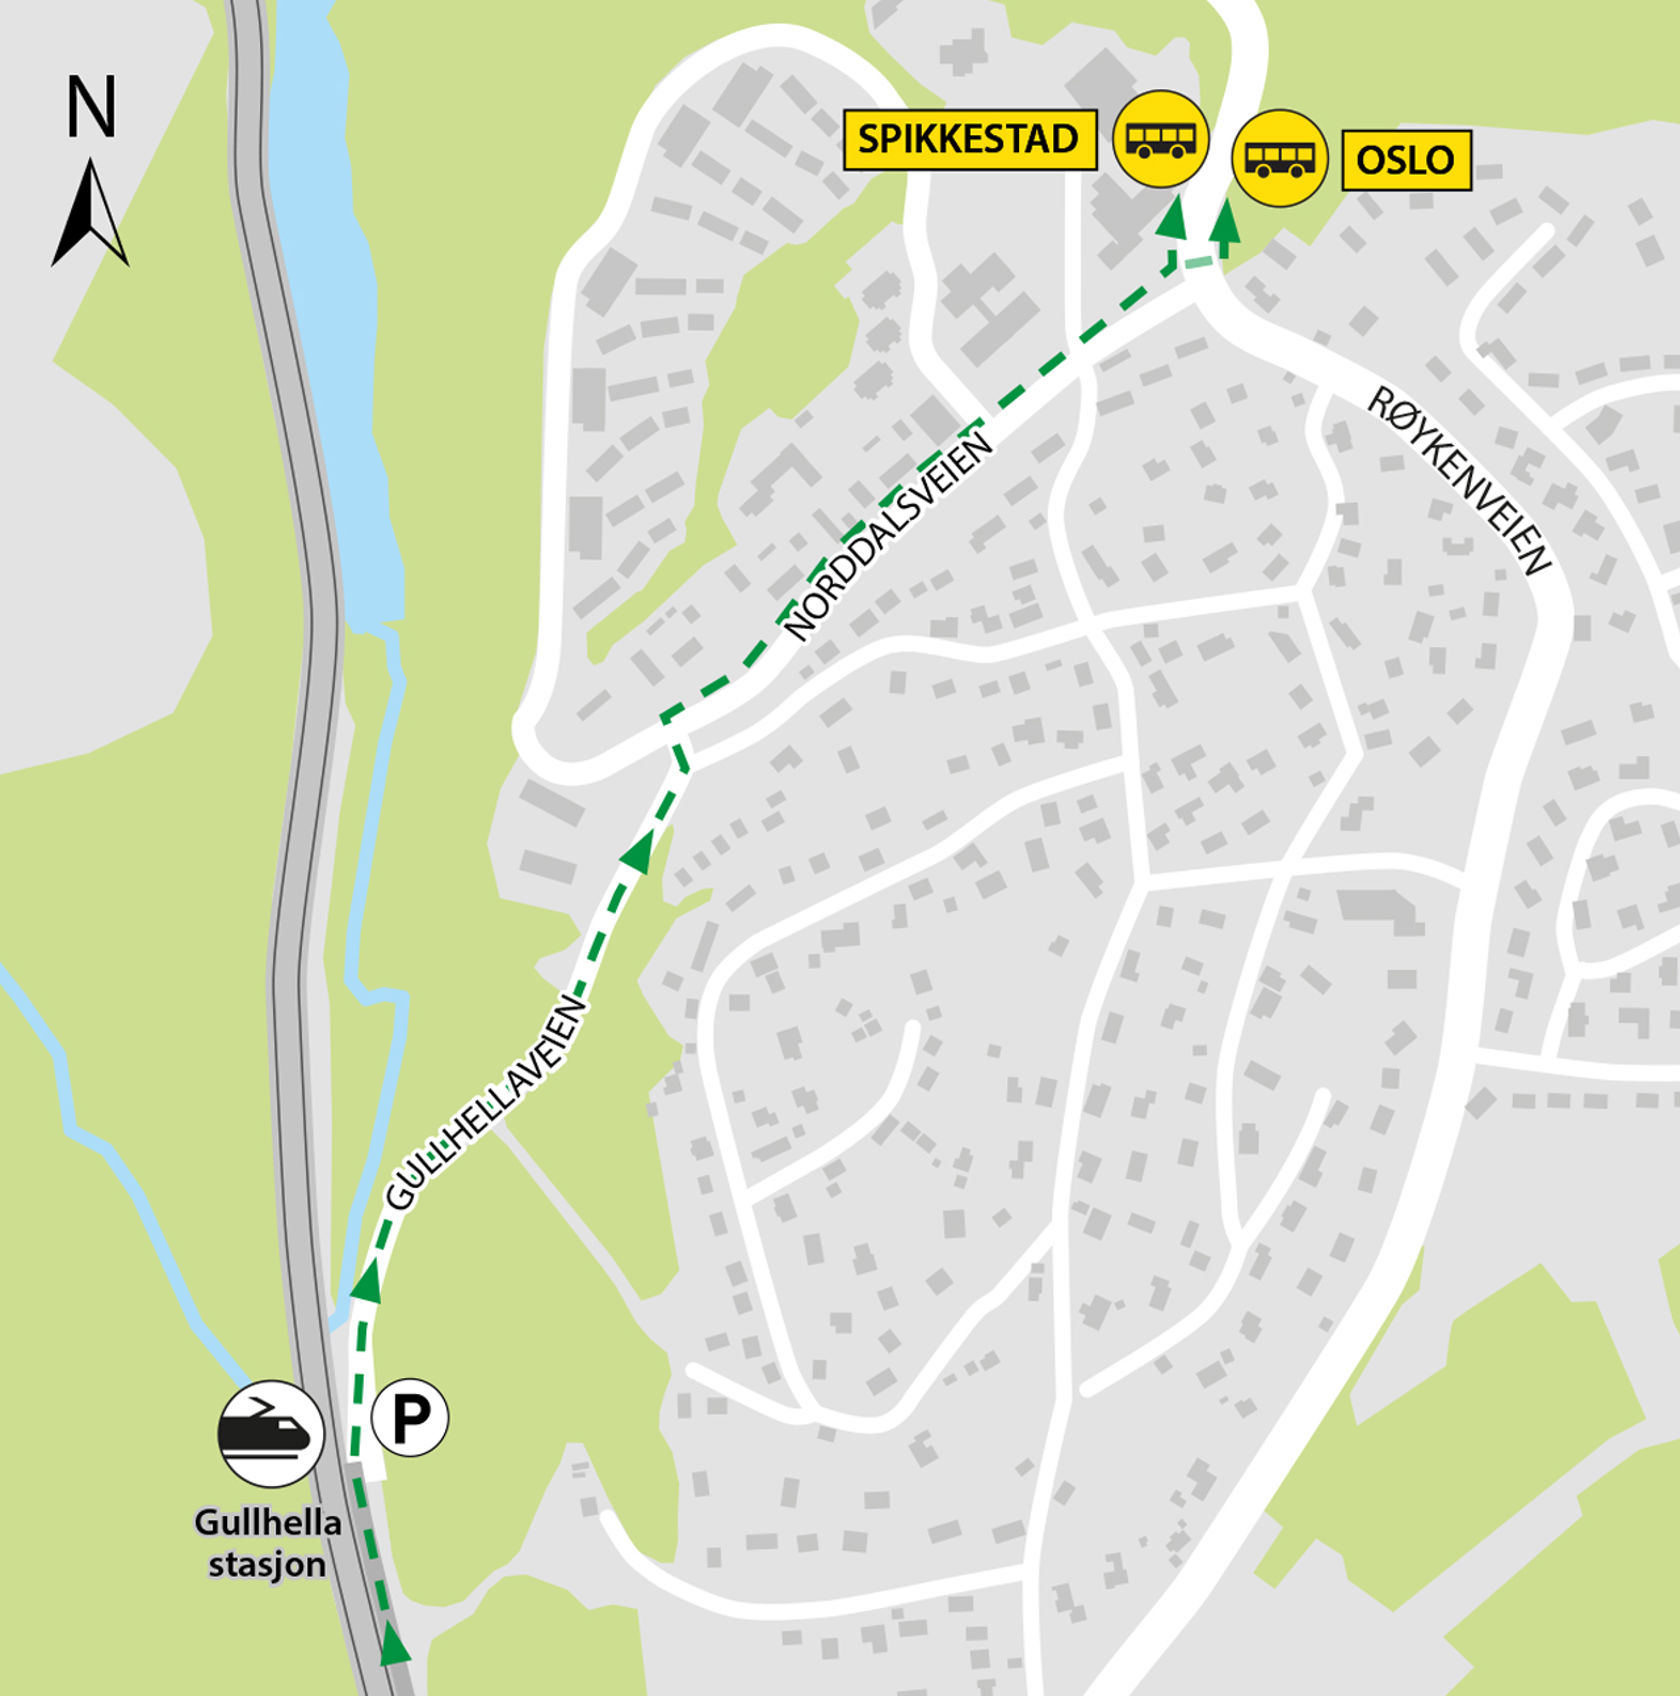 The map shows that the buses run from Gullhella nursing home, about 1 km walking distance